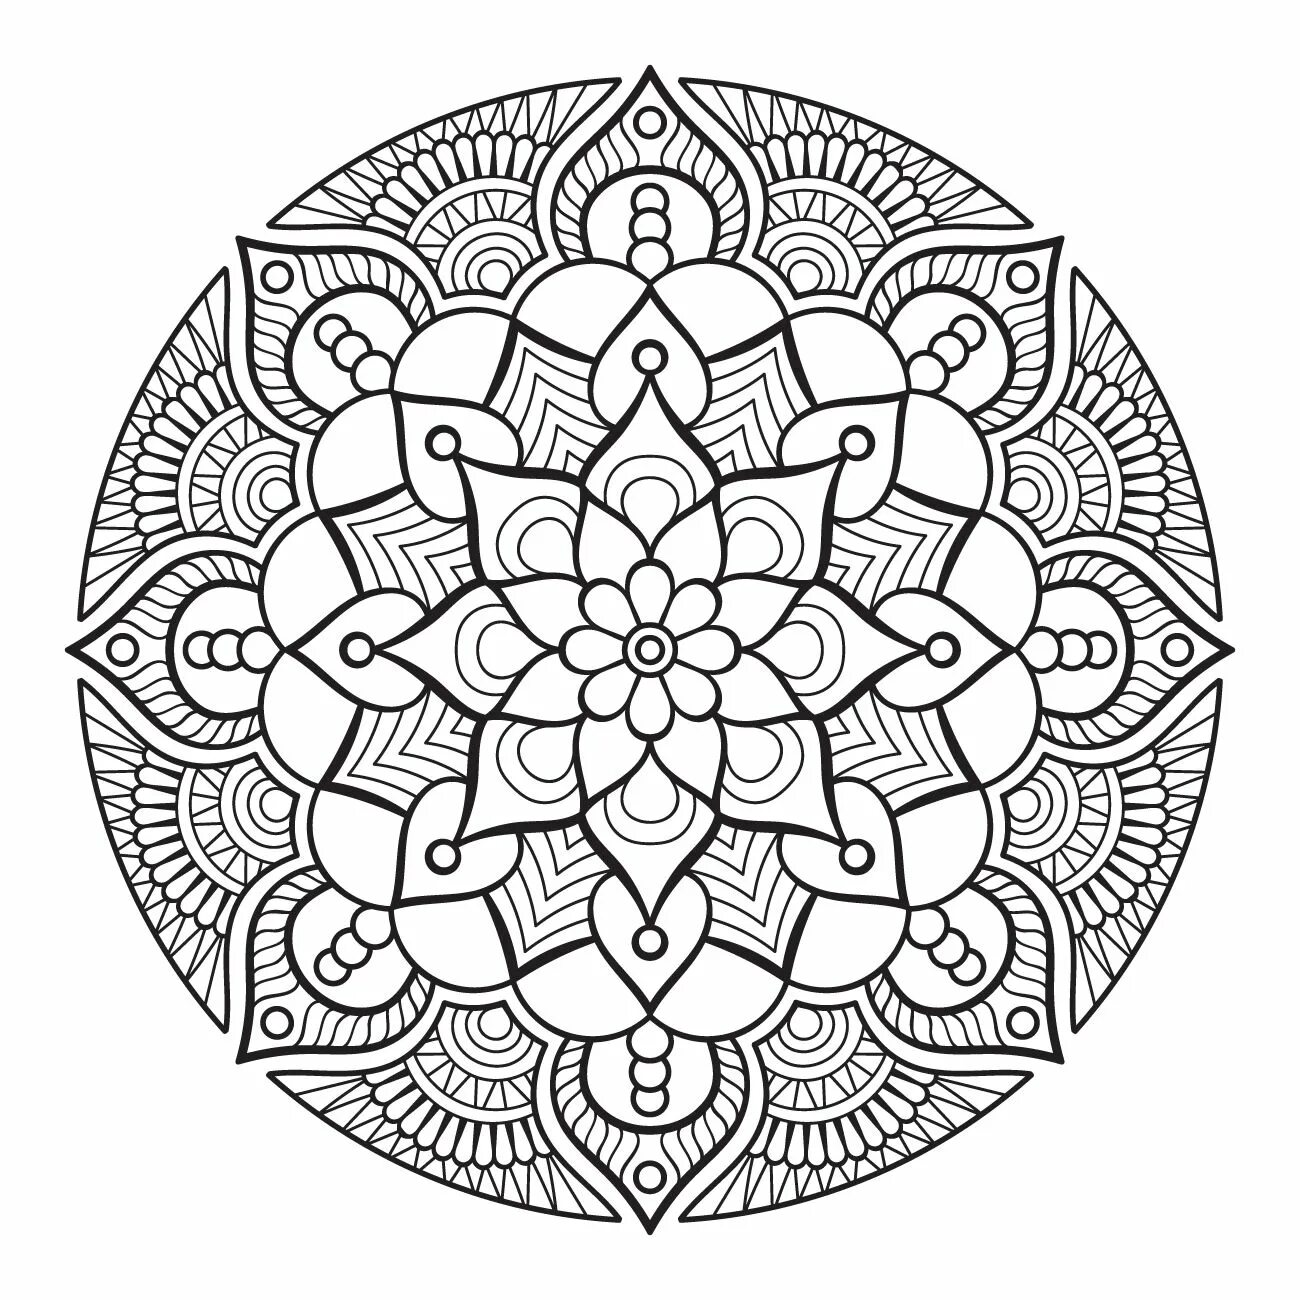 Delightful coloring mandala of peace and tranquility